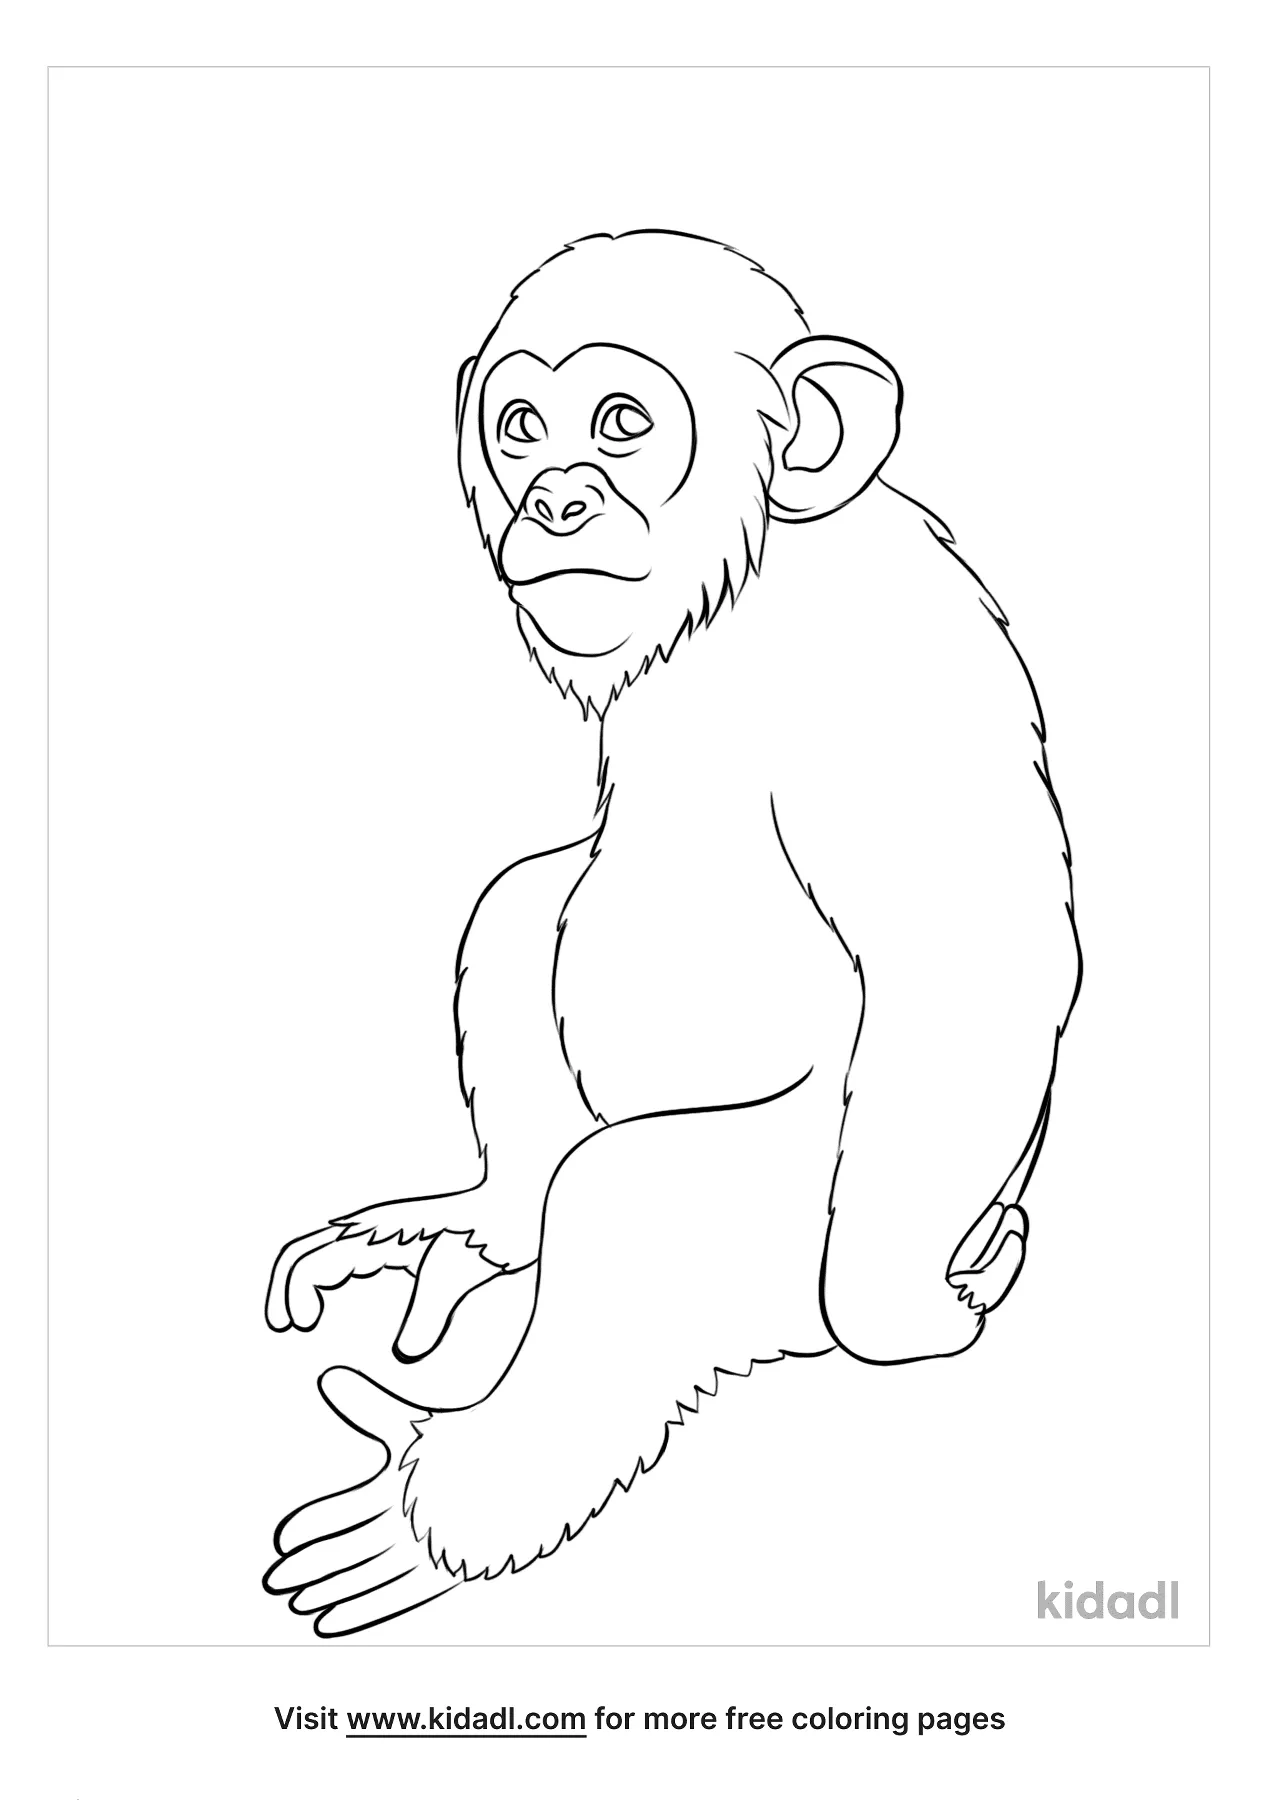 Ape Coloring Pages   Free Mammals Coloring Pages   Kidadl